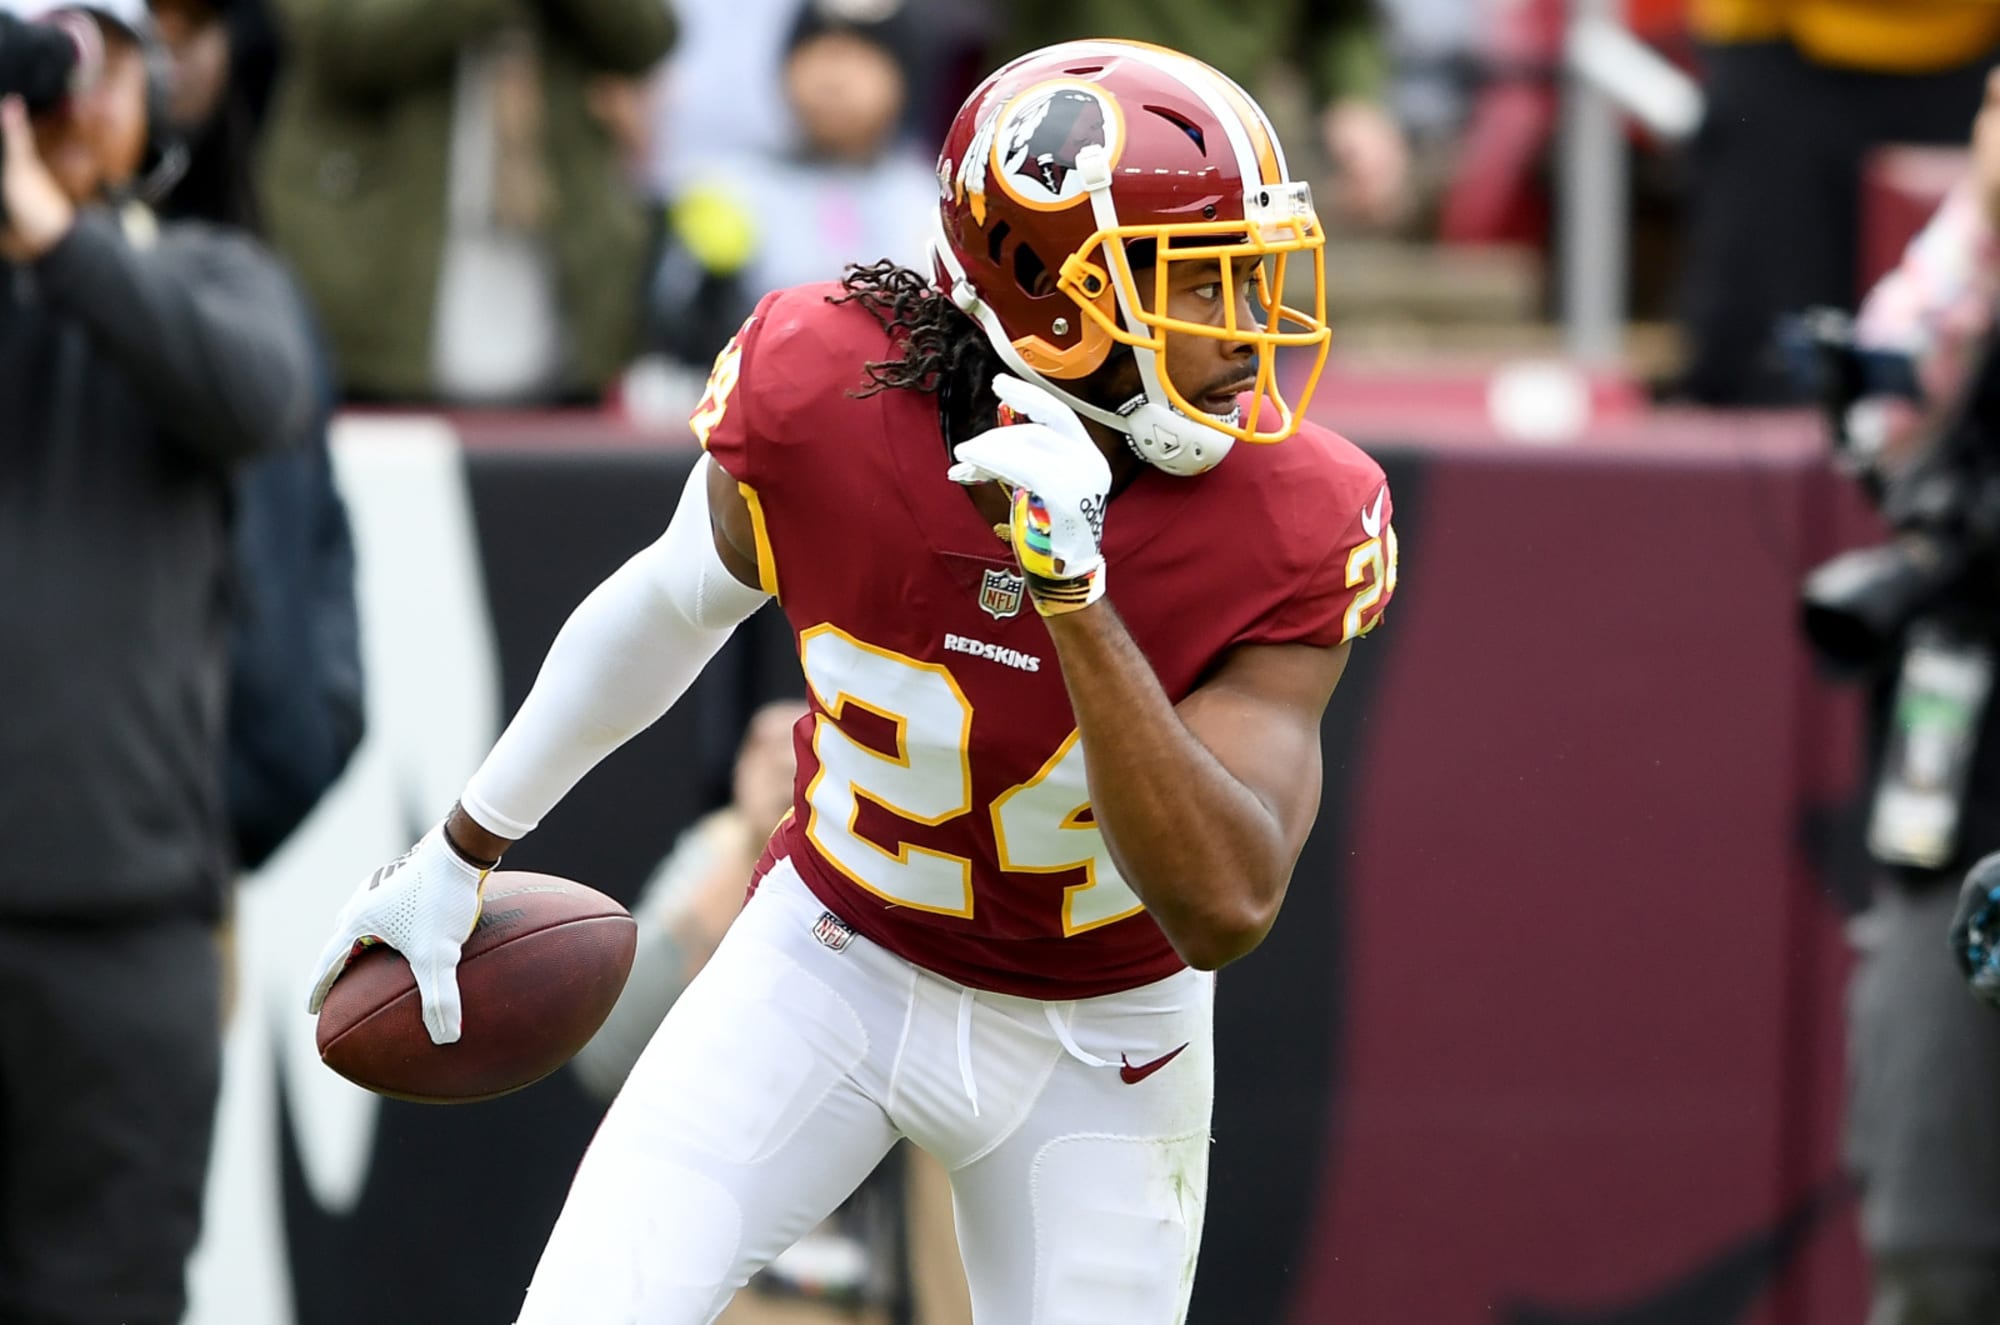 Josh Norman could work for Chiefs on a proveit deal in free agency